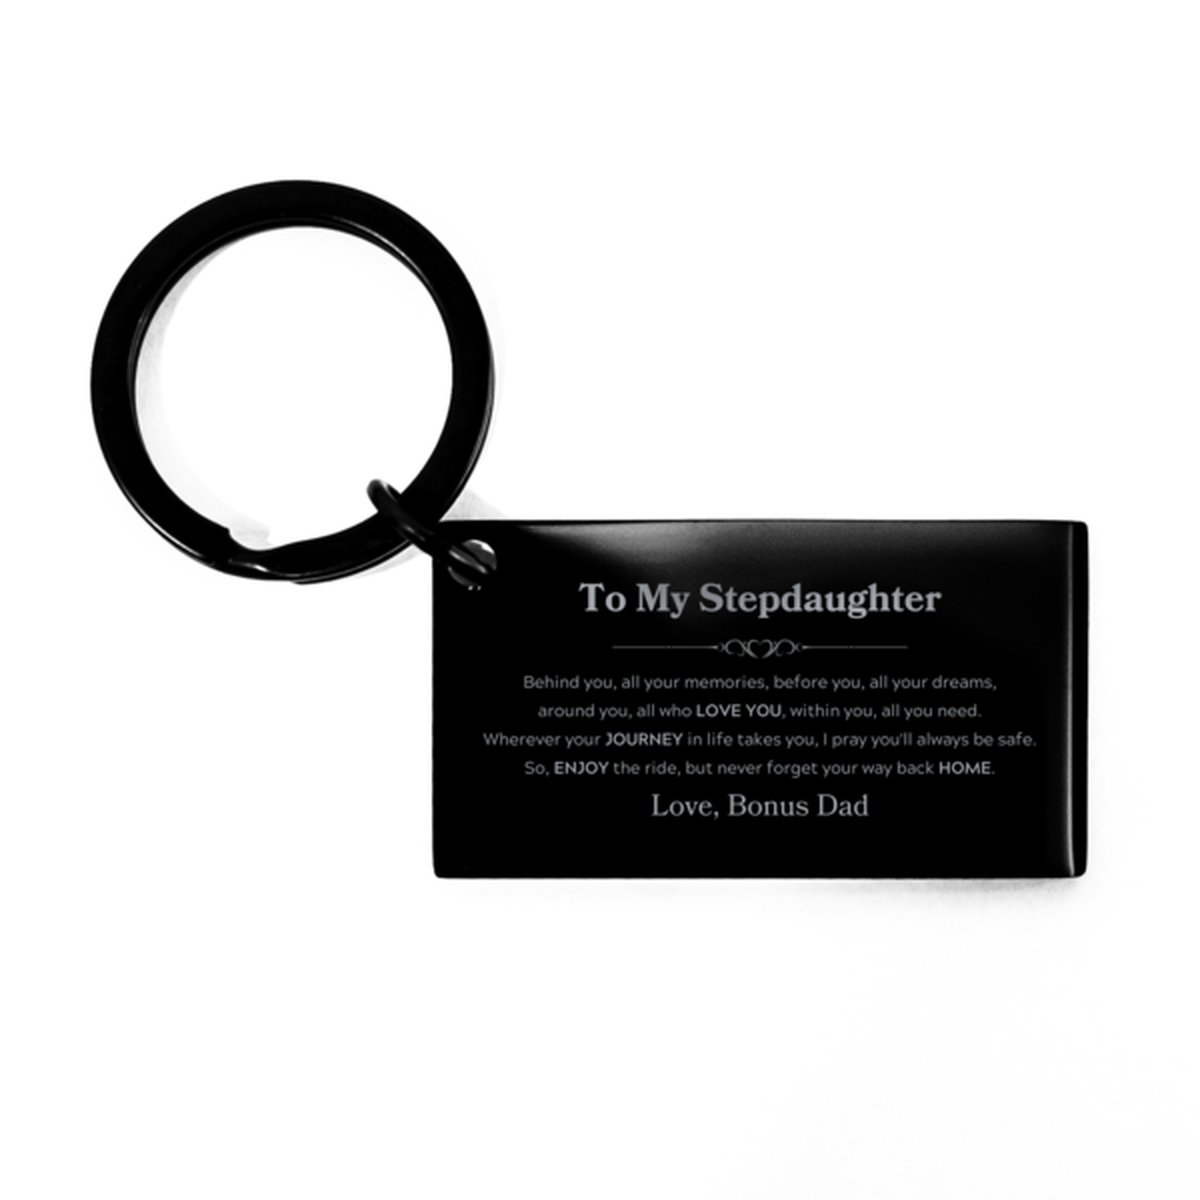 To My Stepdaughter Graduation Gifts from Bonus Dad, Stepdaughter Keychain Christmas Birthday Gifts for Stepdaughter Behind you, all your memories, before you, all your dreams. Love, Bonus Dad